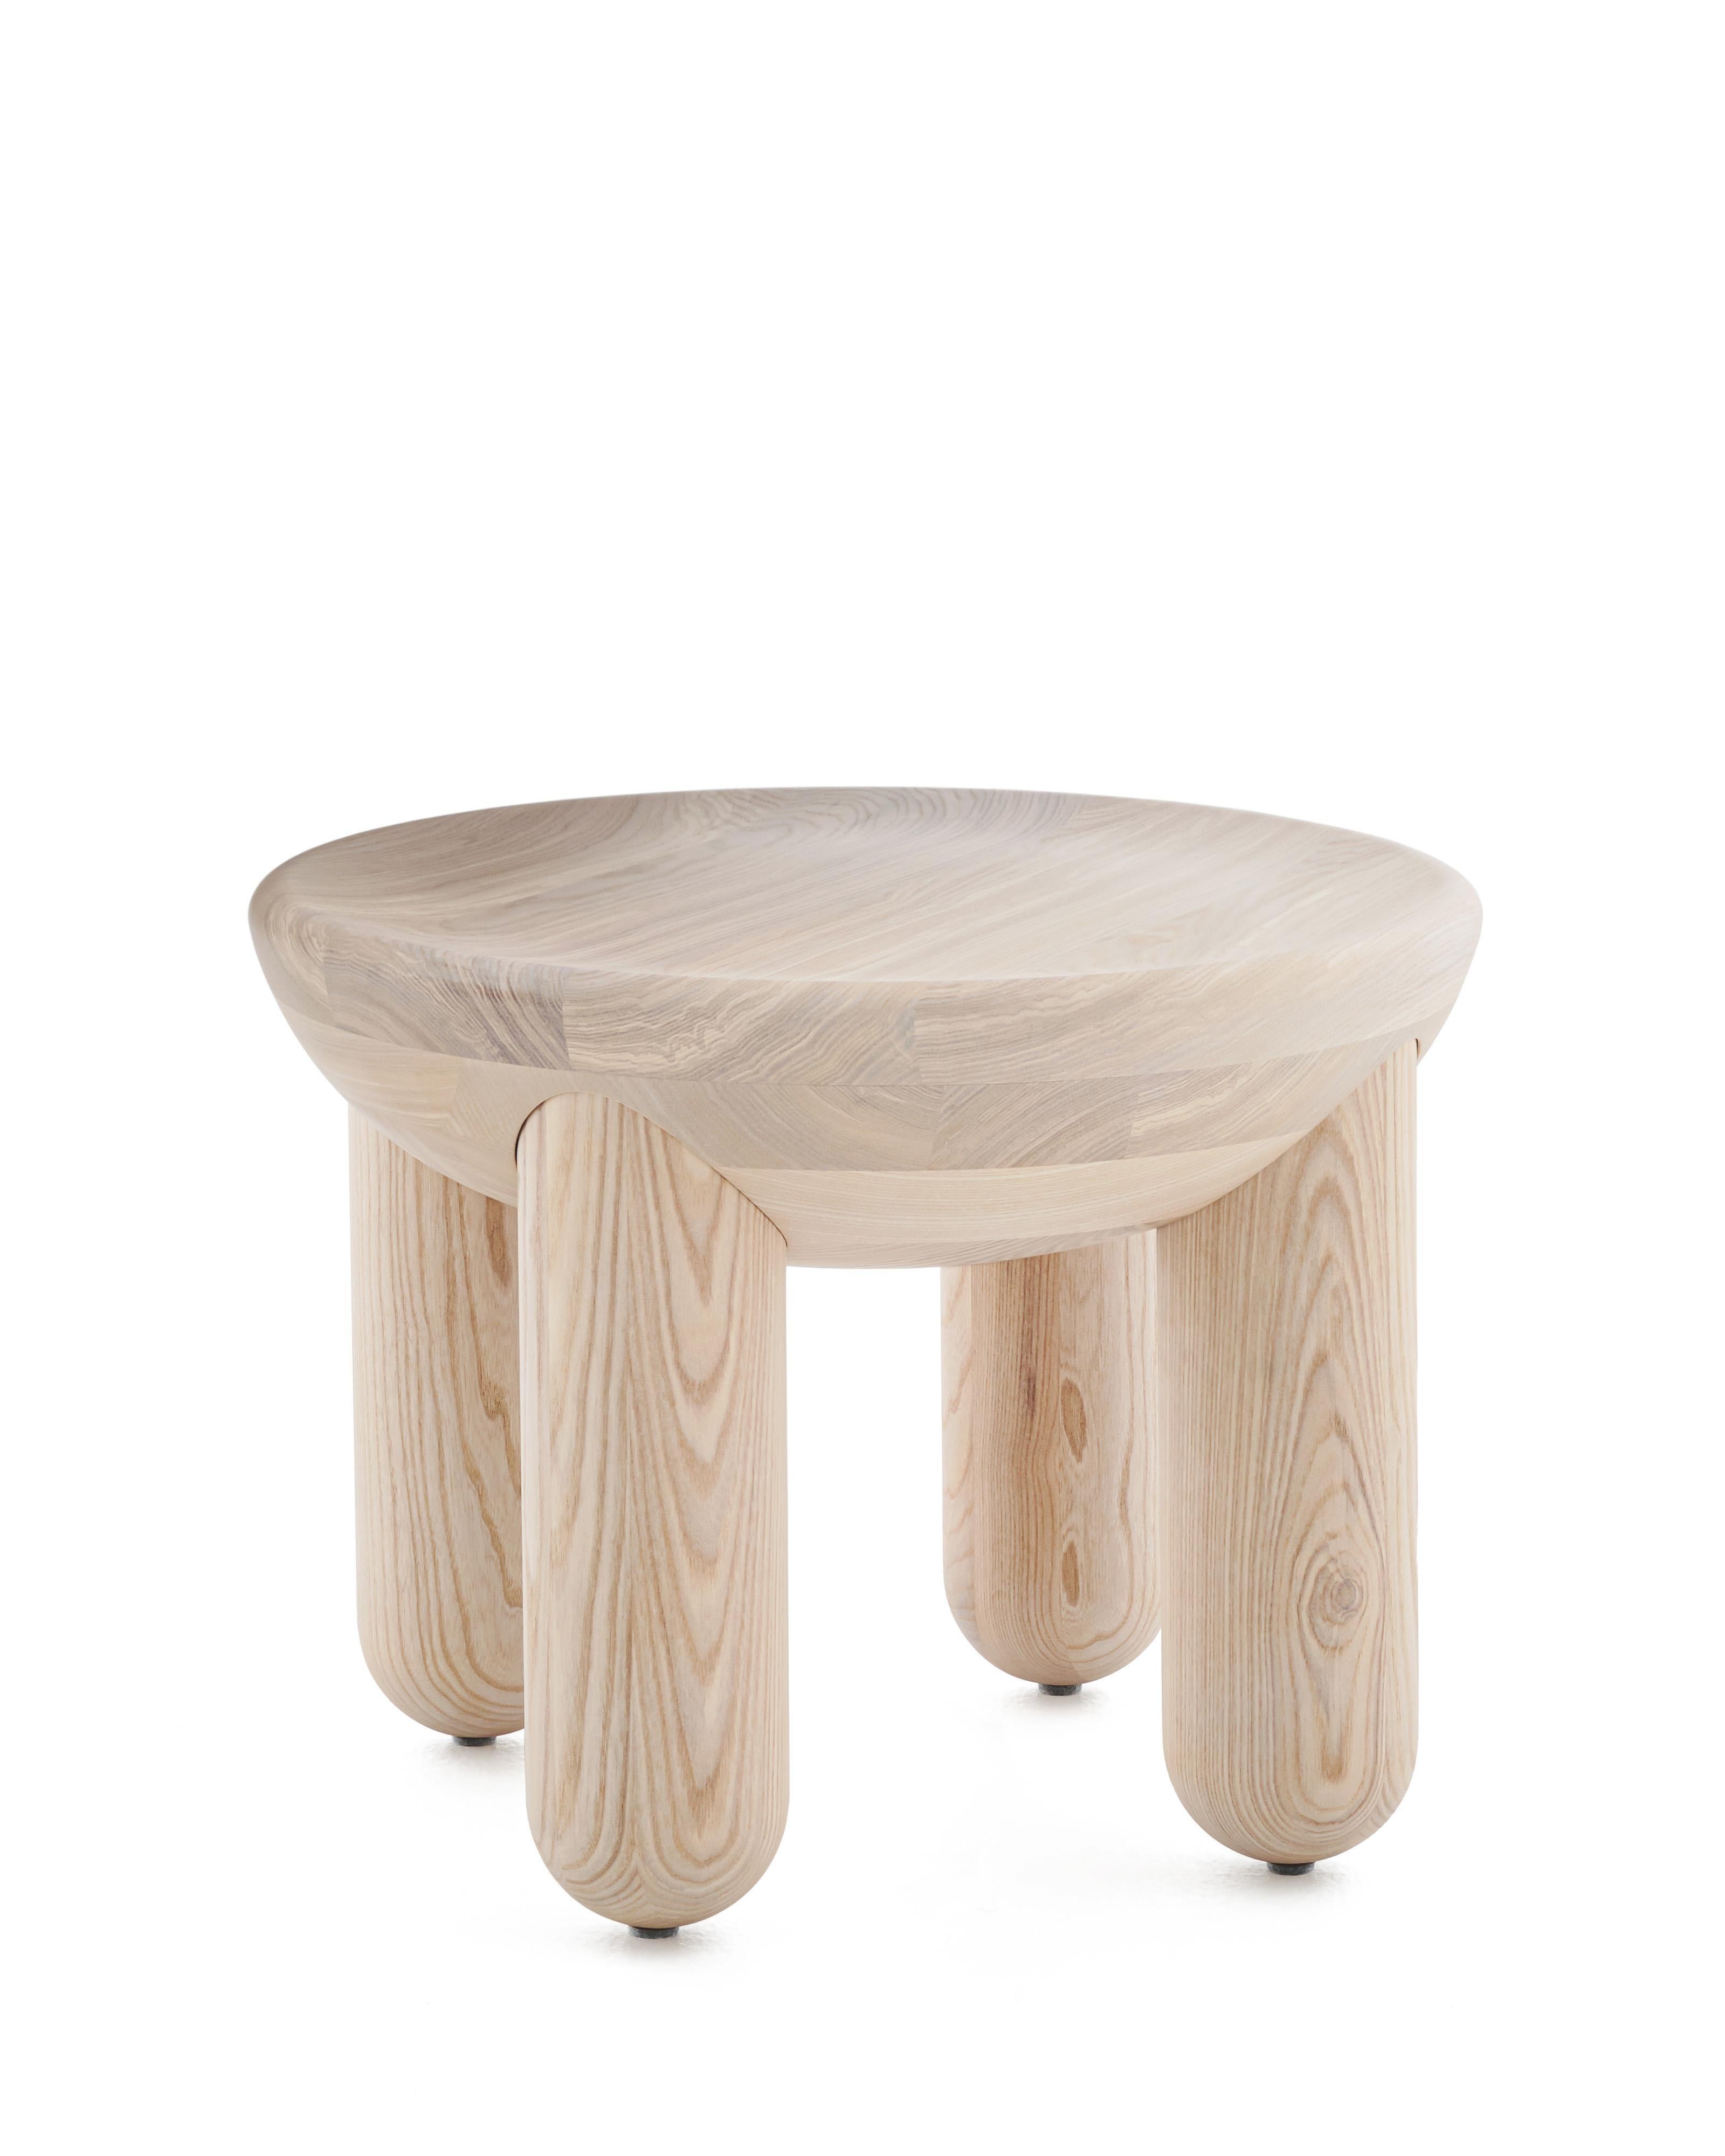 Organic Modern Contemporary Wooden Coffee Table 'Freyja 2' by Noom, Natural Ash For Sale